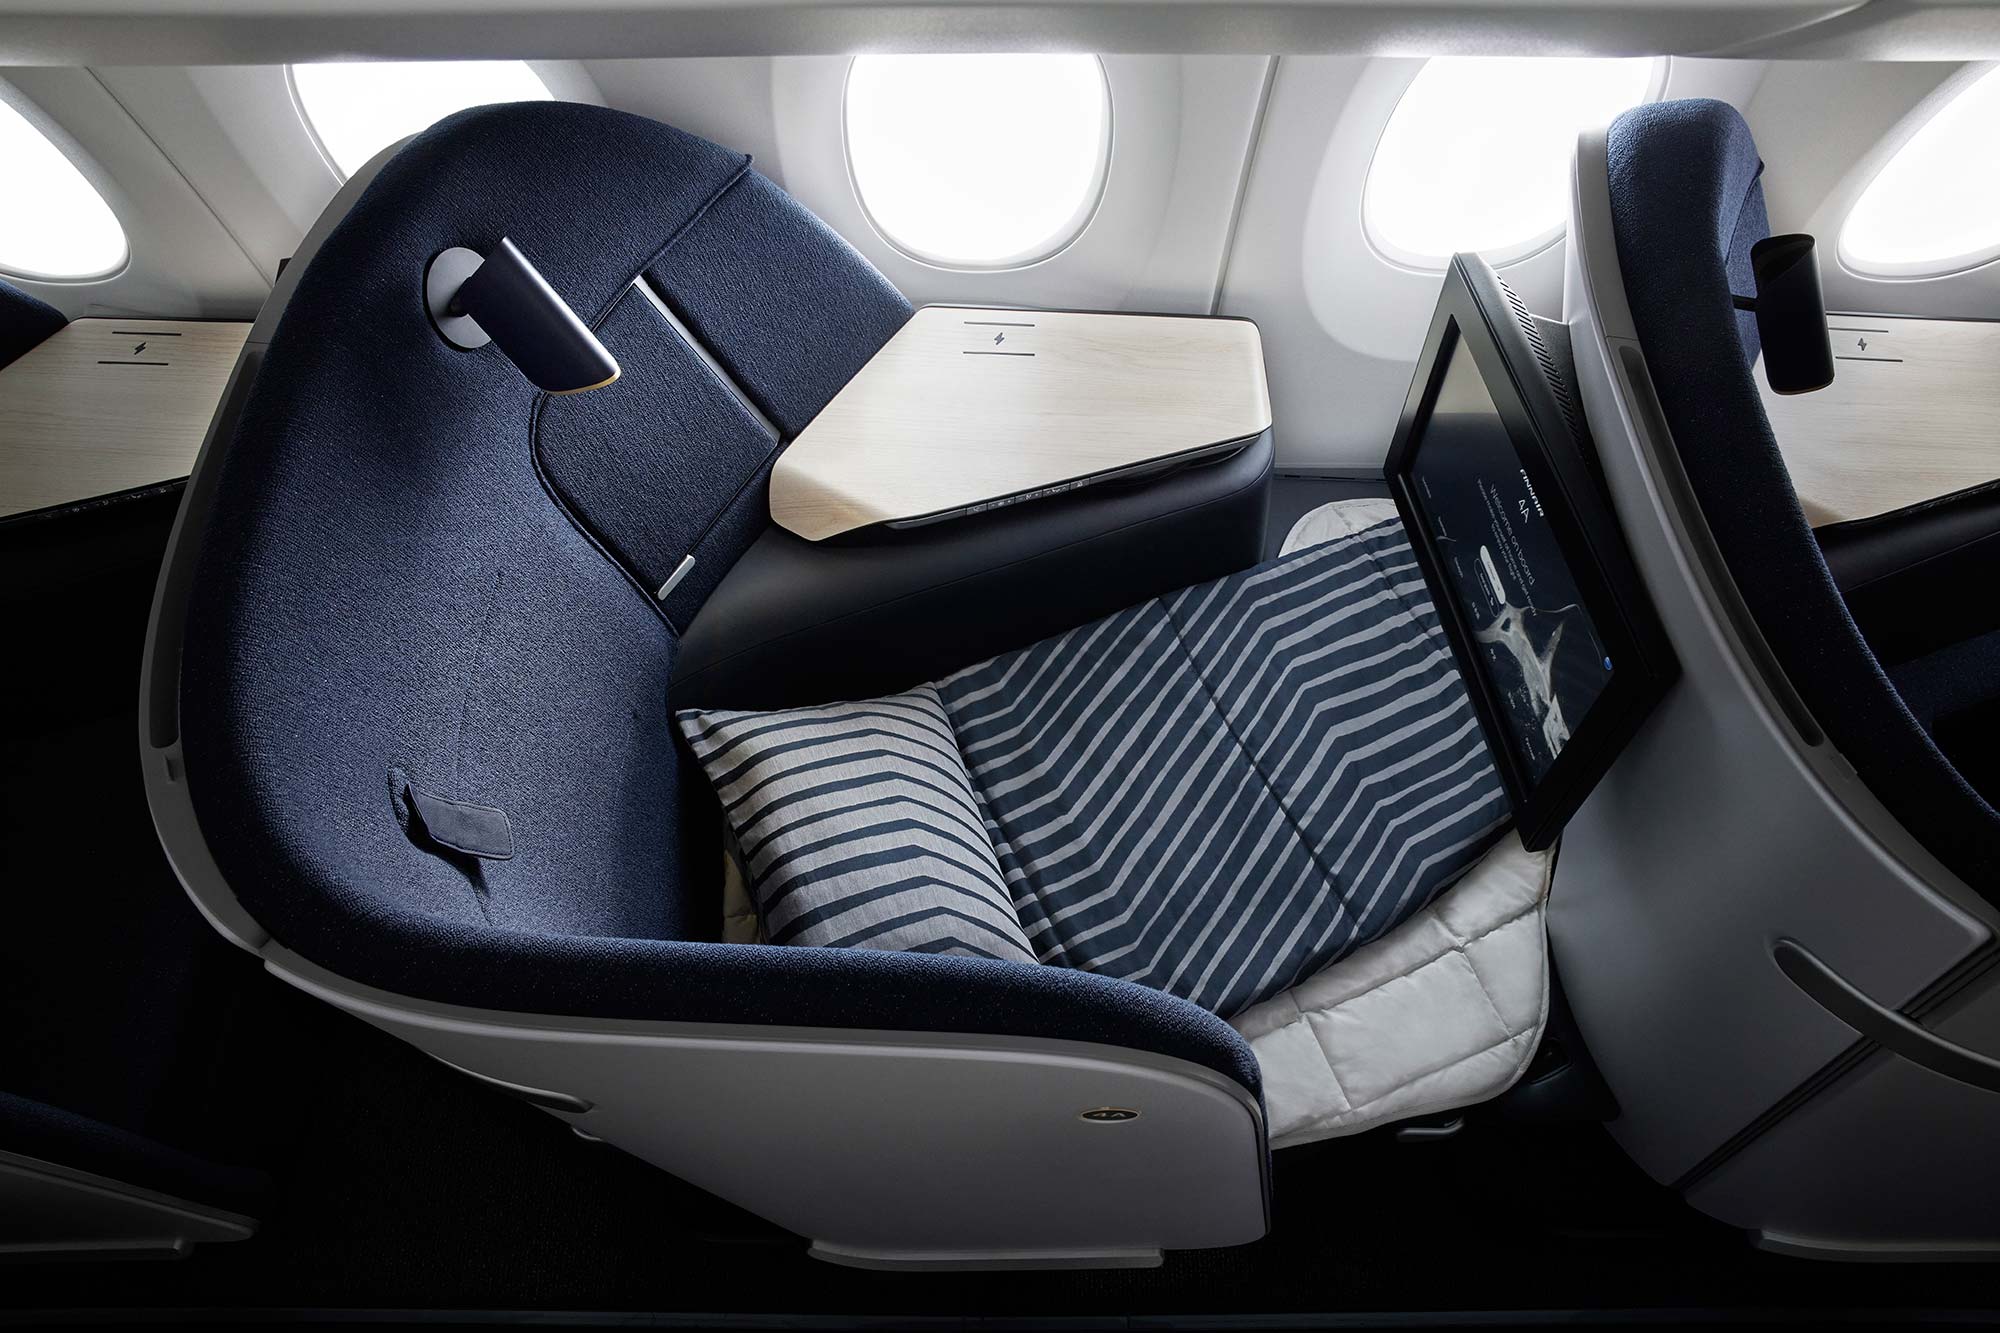 AY New J Overhead Bed Finnair - Travel News, Insights & Resources.